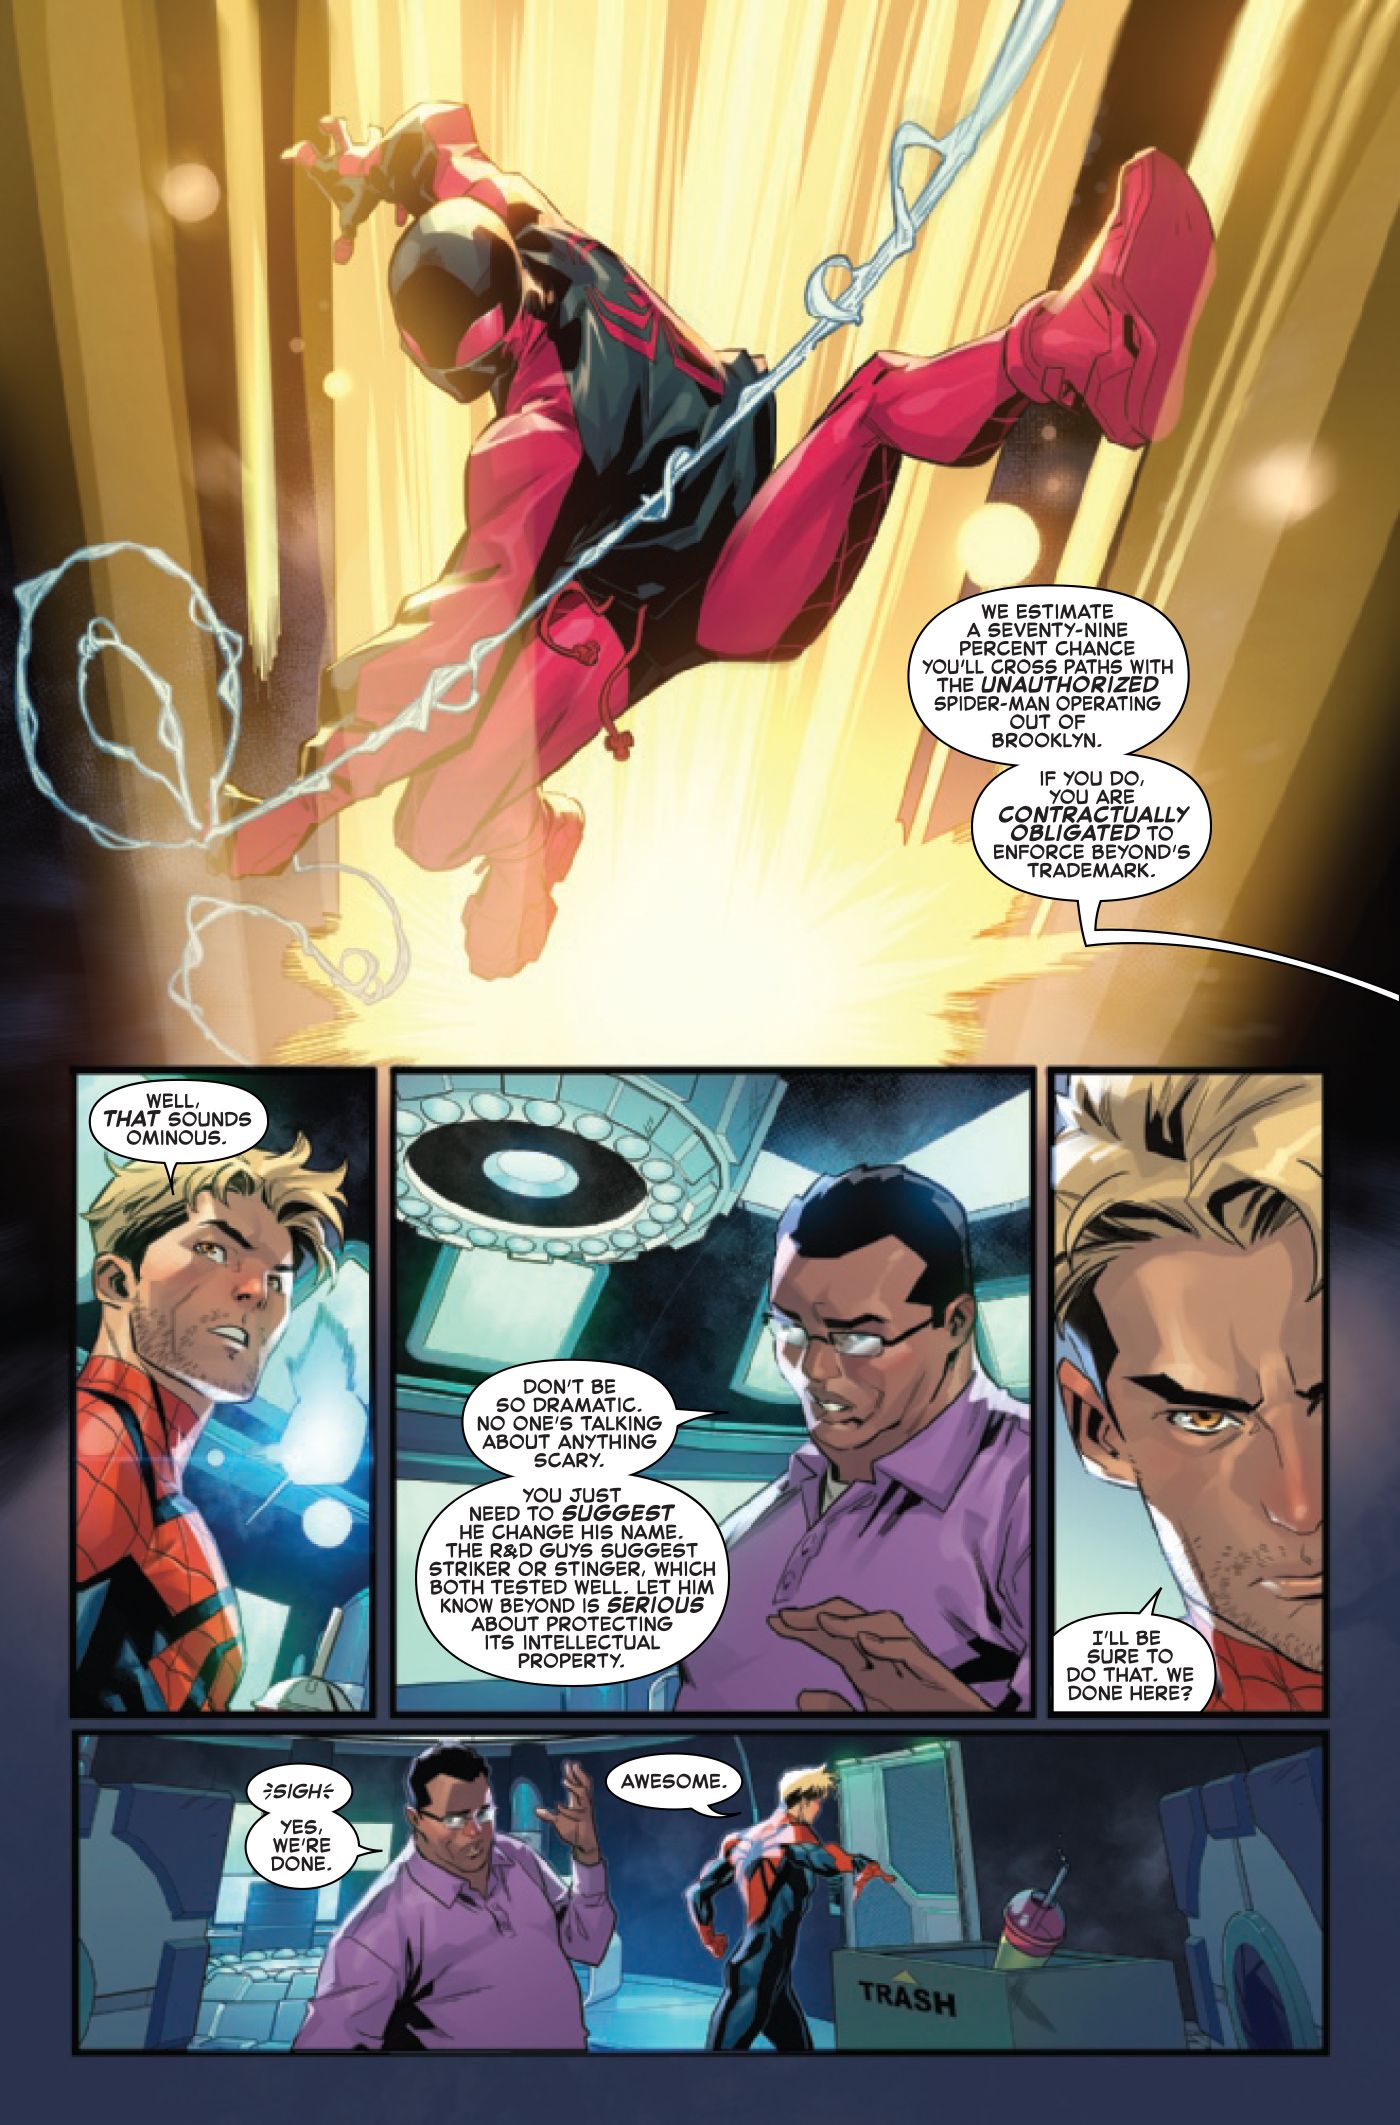 Ben is informed of a probable confrontation with Miles Morales.